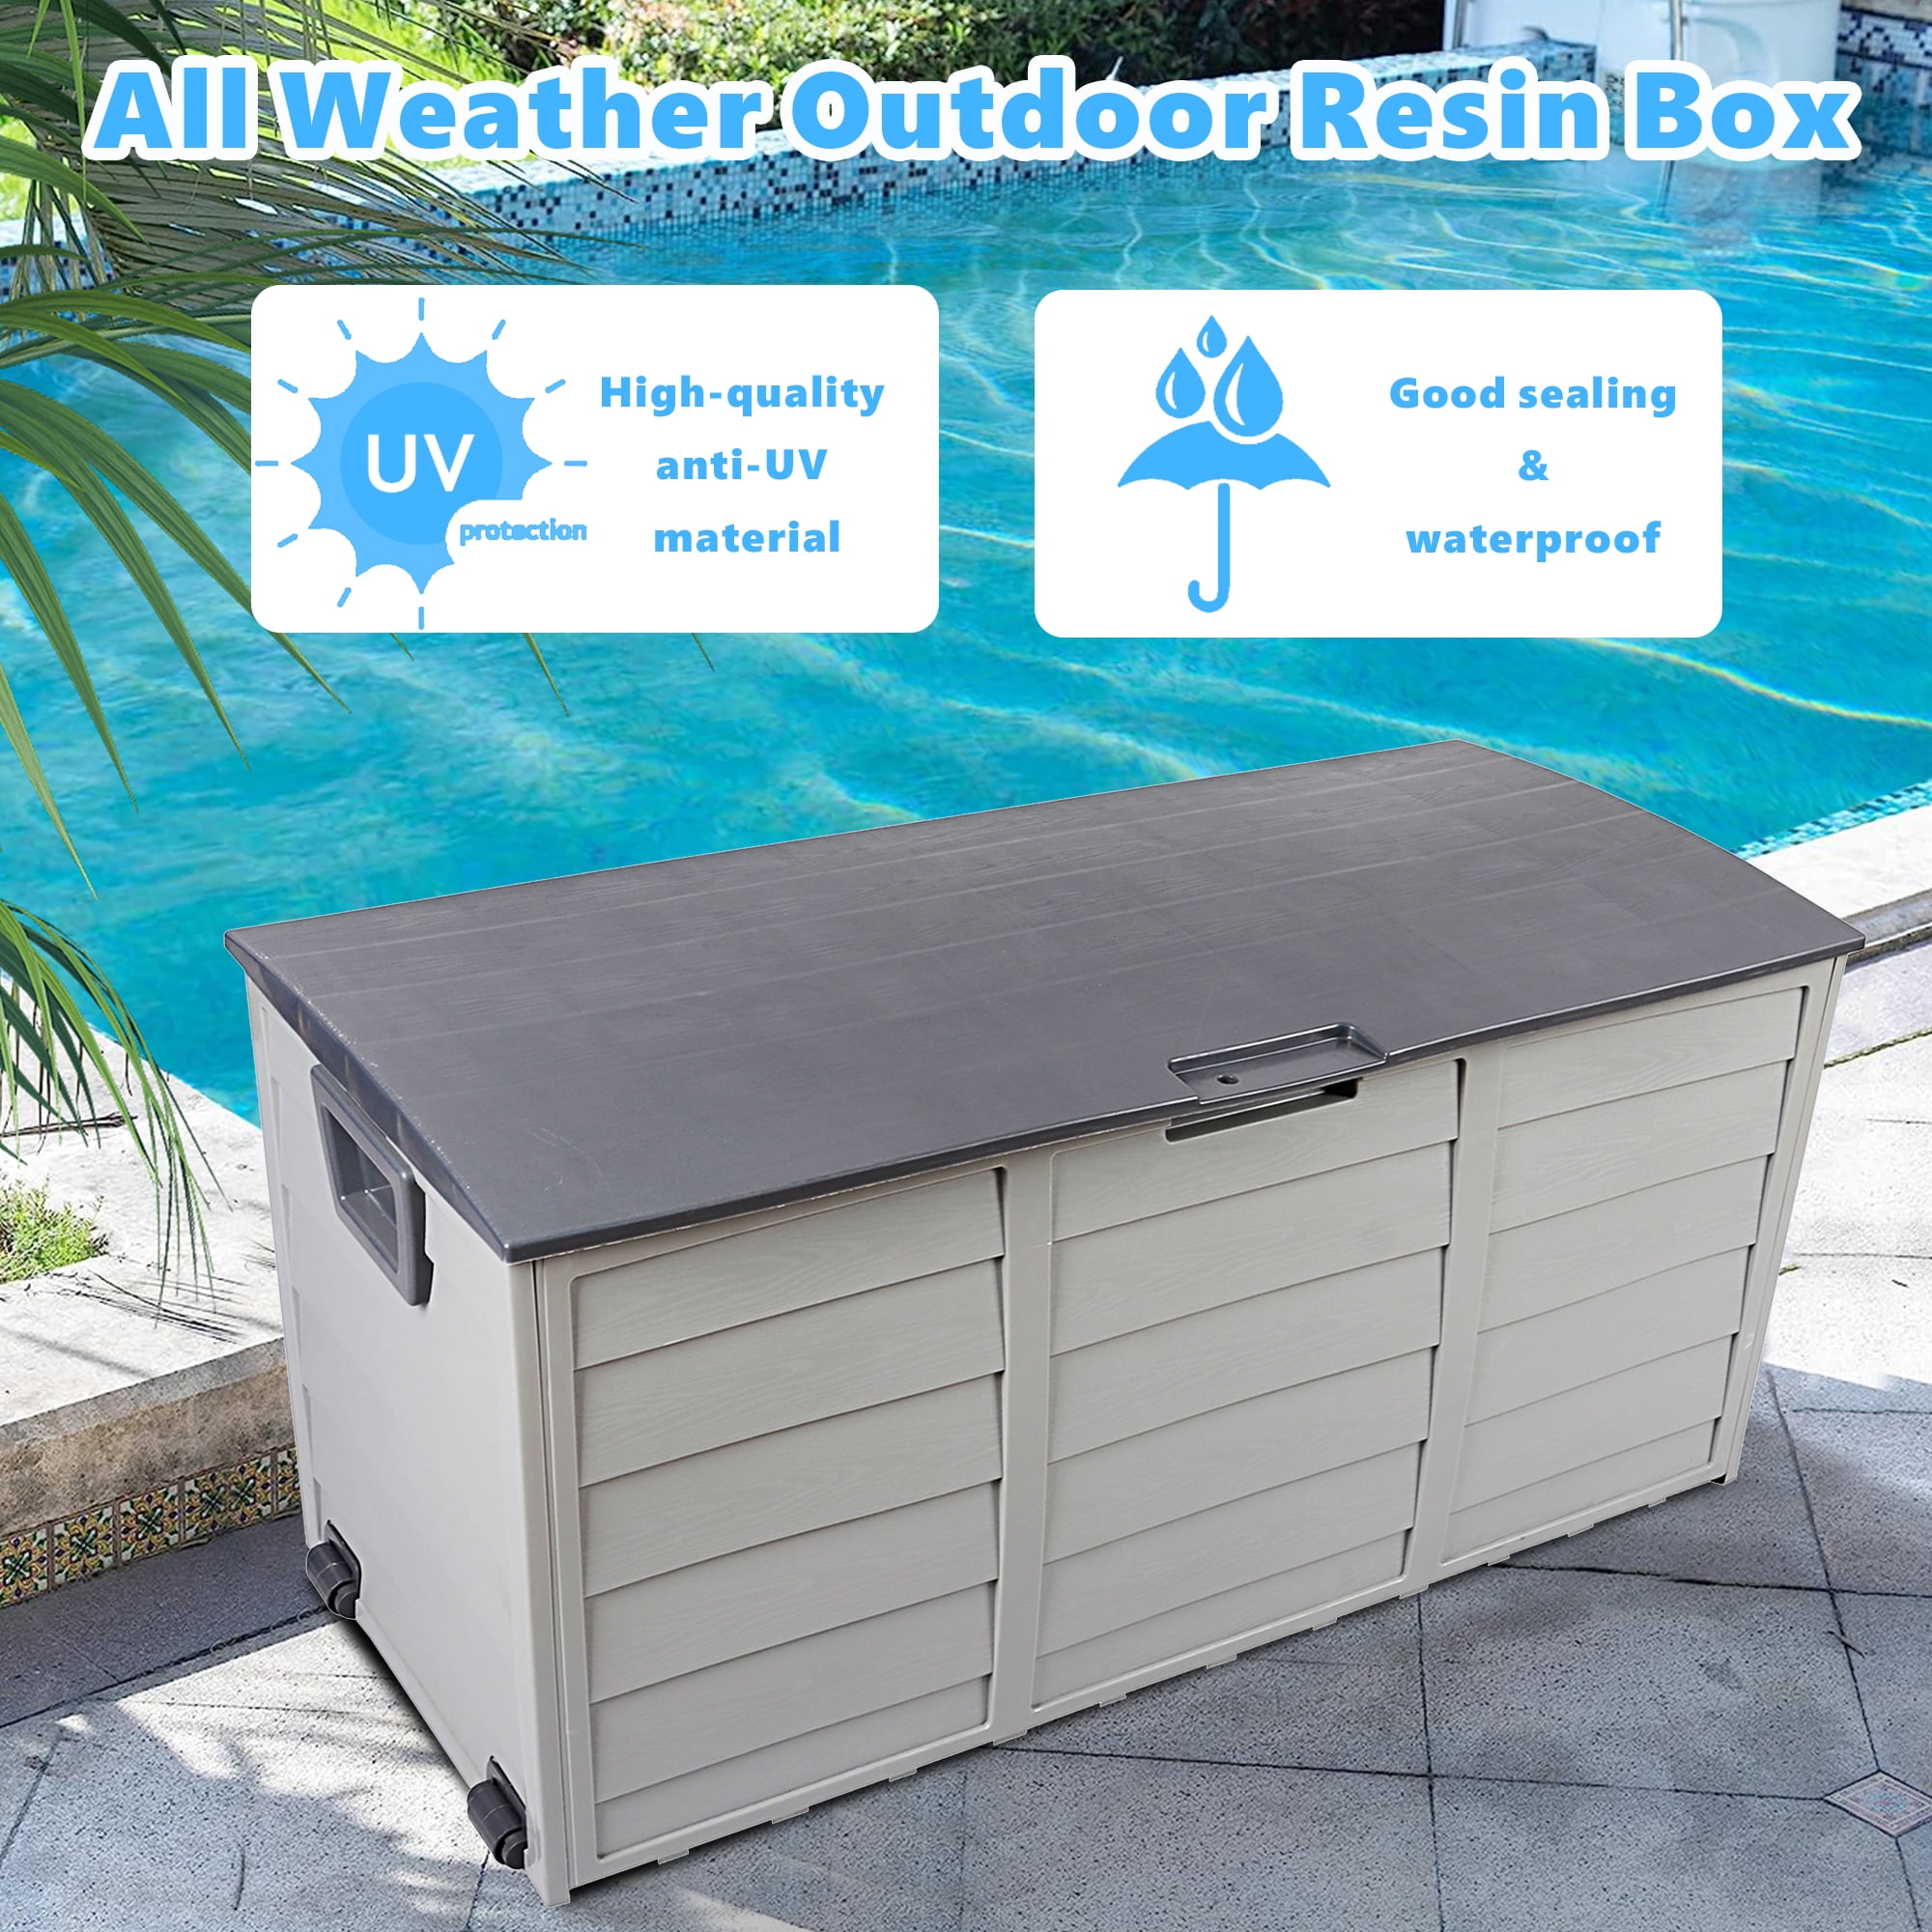 Seizeen Deck Box, 51 Gallon Outdoor Storage Box for Pool Garden Porch,  Patio Resin Storage Cabinet Bench Load 440LBS, Waterproof for Tools Toys